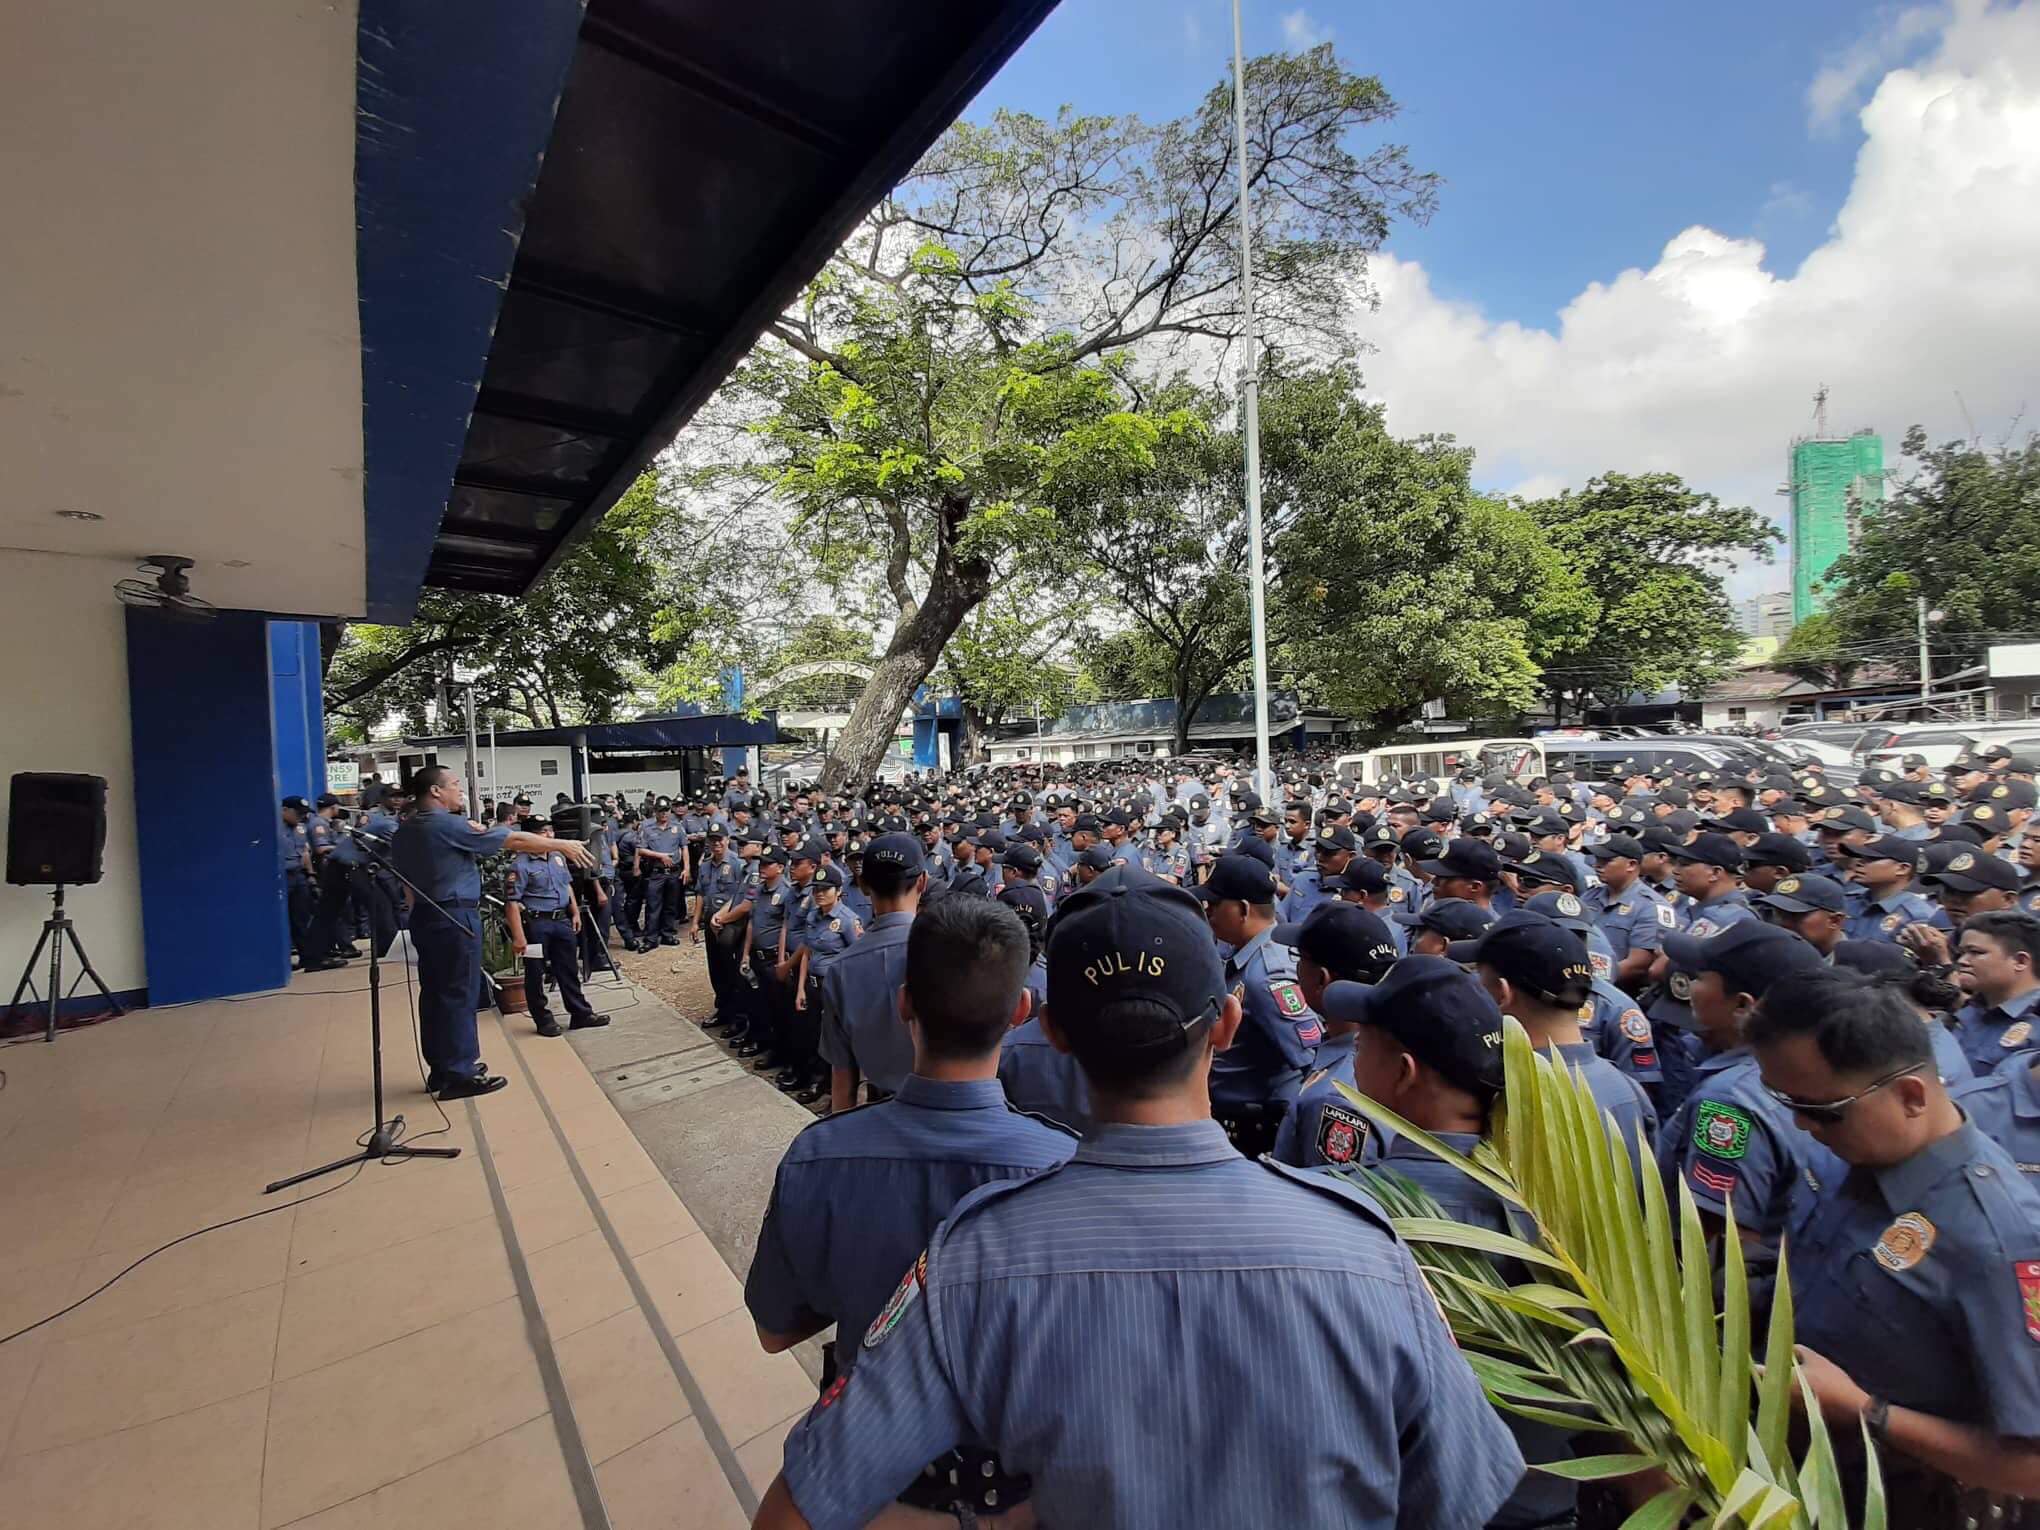 4k cops now in Cebu City for Sinulog; more to arrive | Cebu Daily News